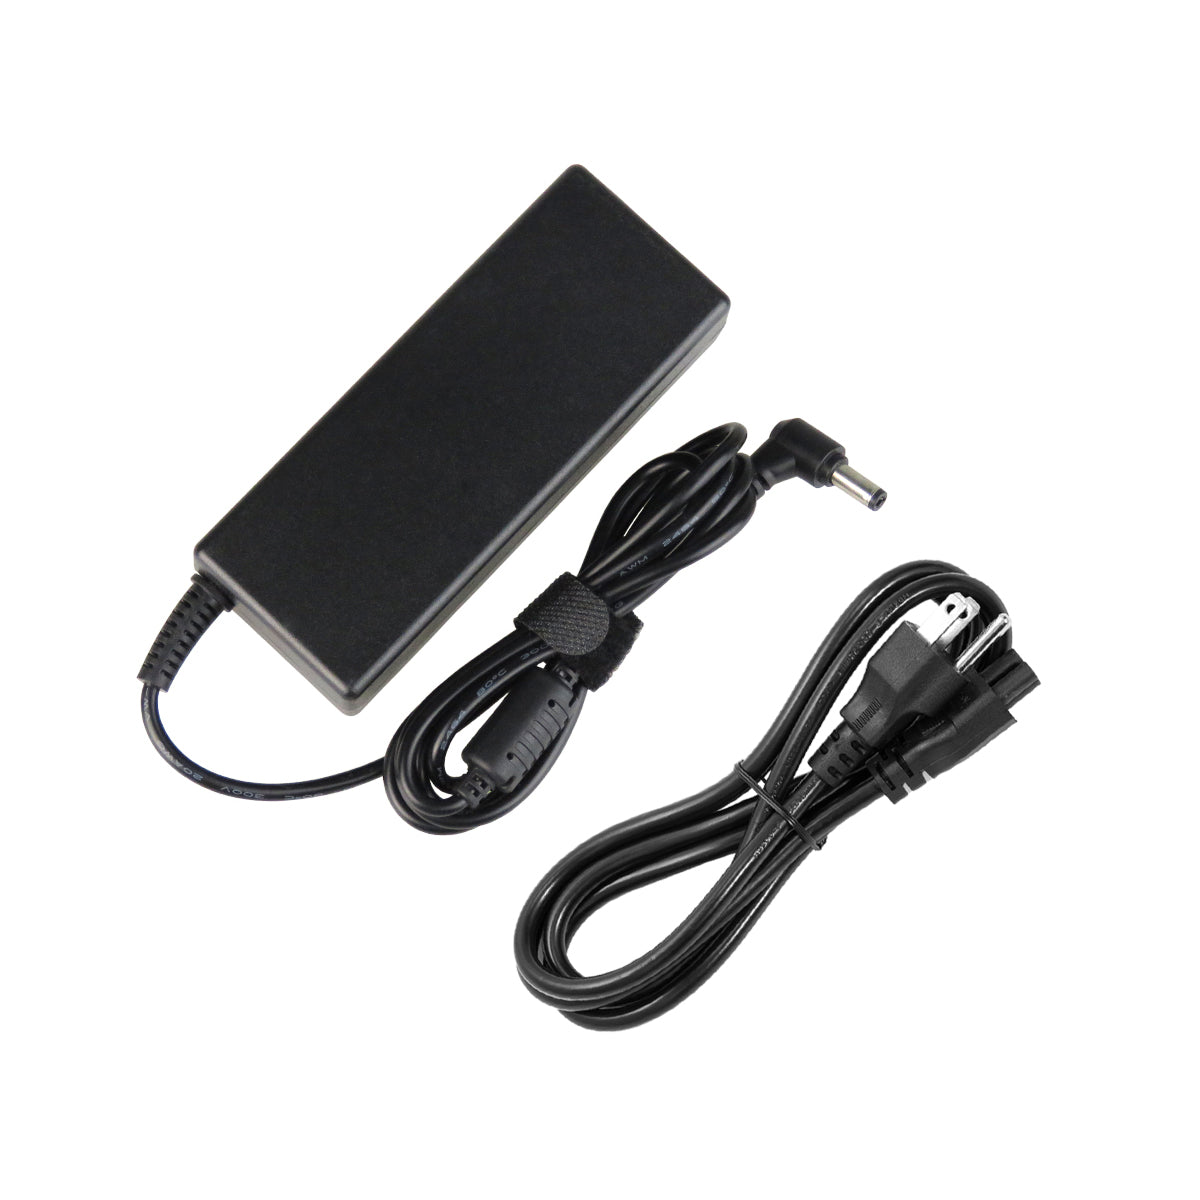 AC Adapter Charger for ASUS N81 Notebook.